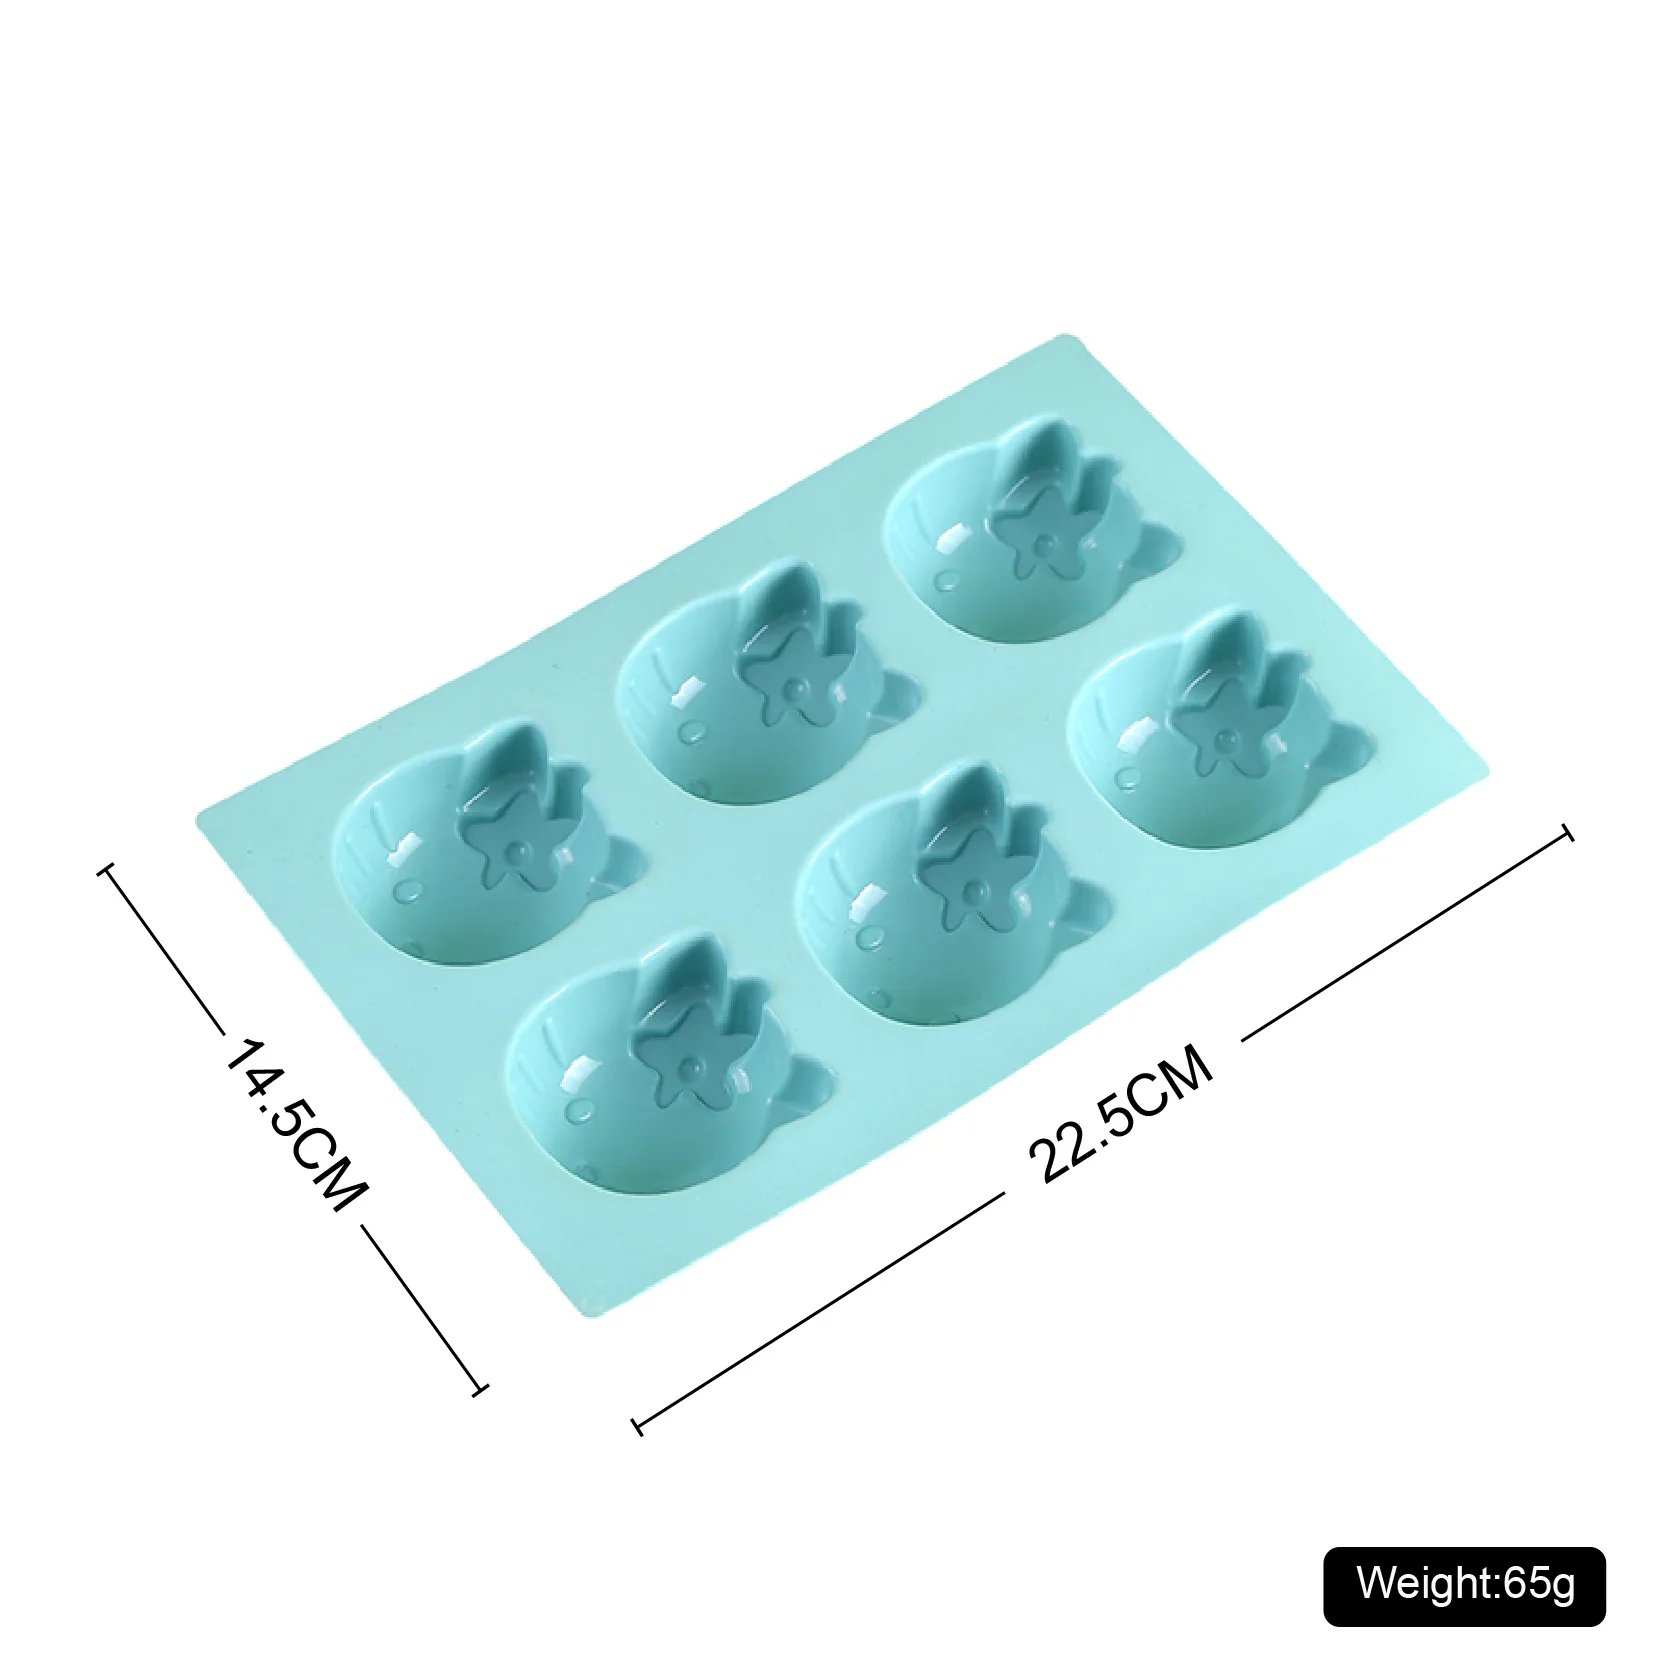 High Quality 6 Cavity Silicone Cake Mold Pink Blue Grey 3 colors Food Grade BPA Free Cake Design Making Tools Kitty Cat Mold